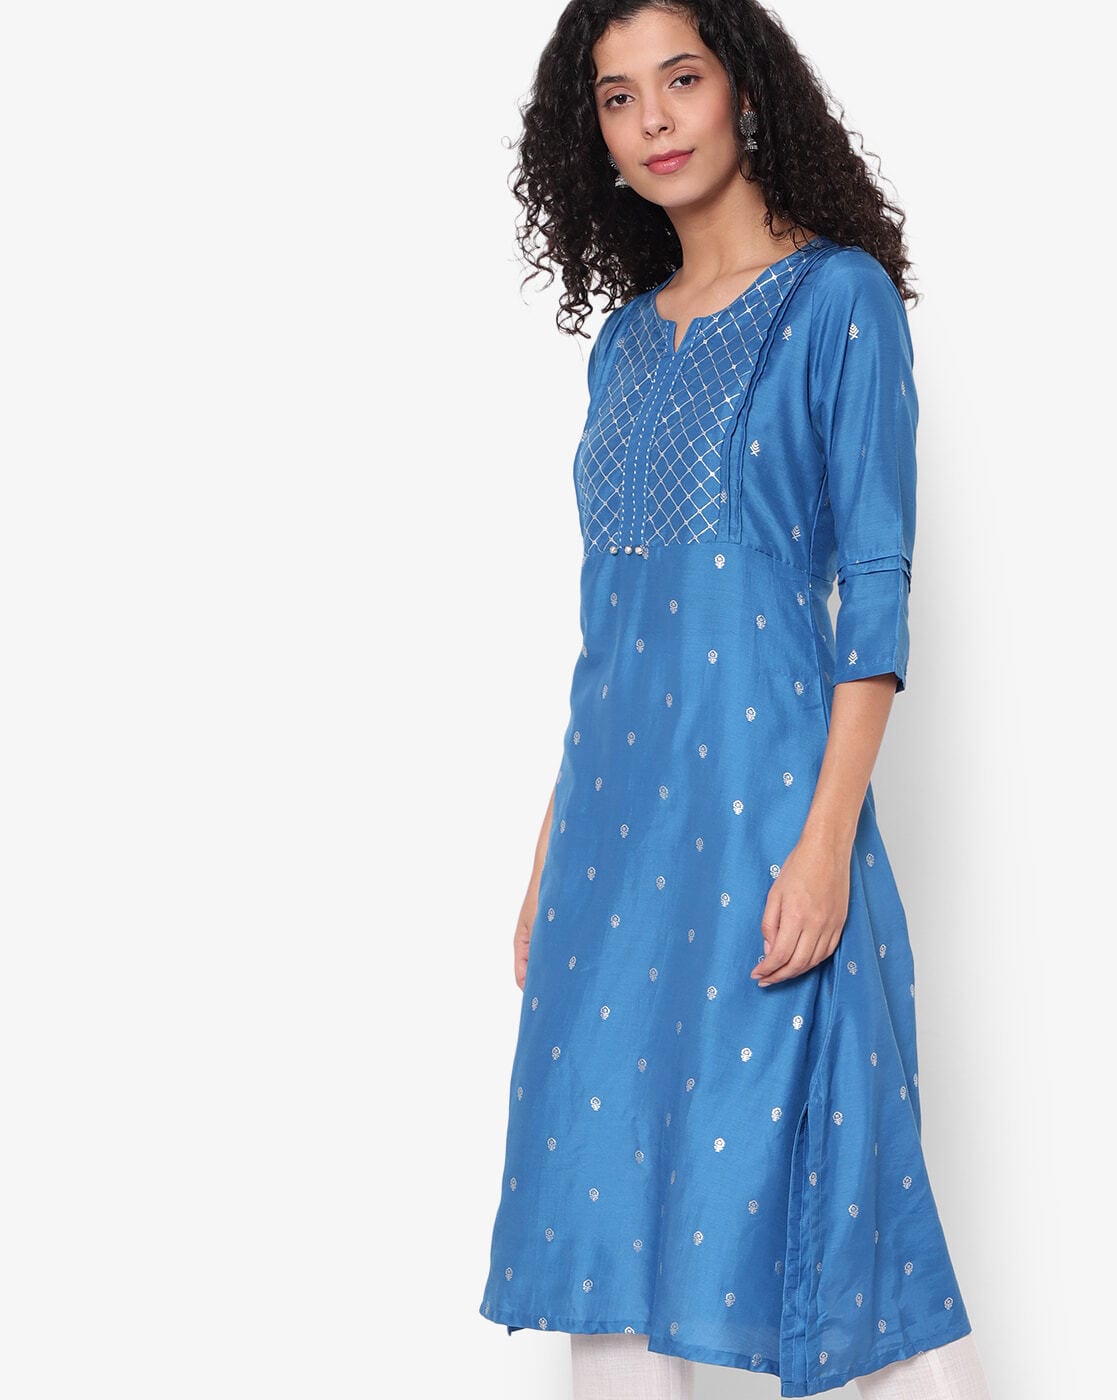 Kaftan Kurtis-A stylish and breezy option for hot and humid days | - Times  of India